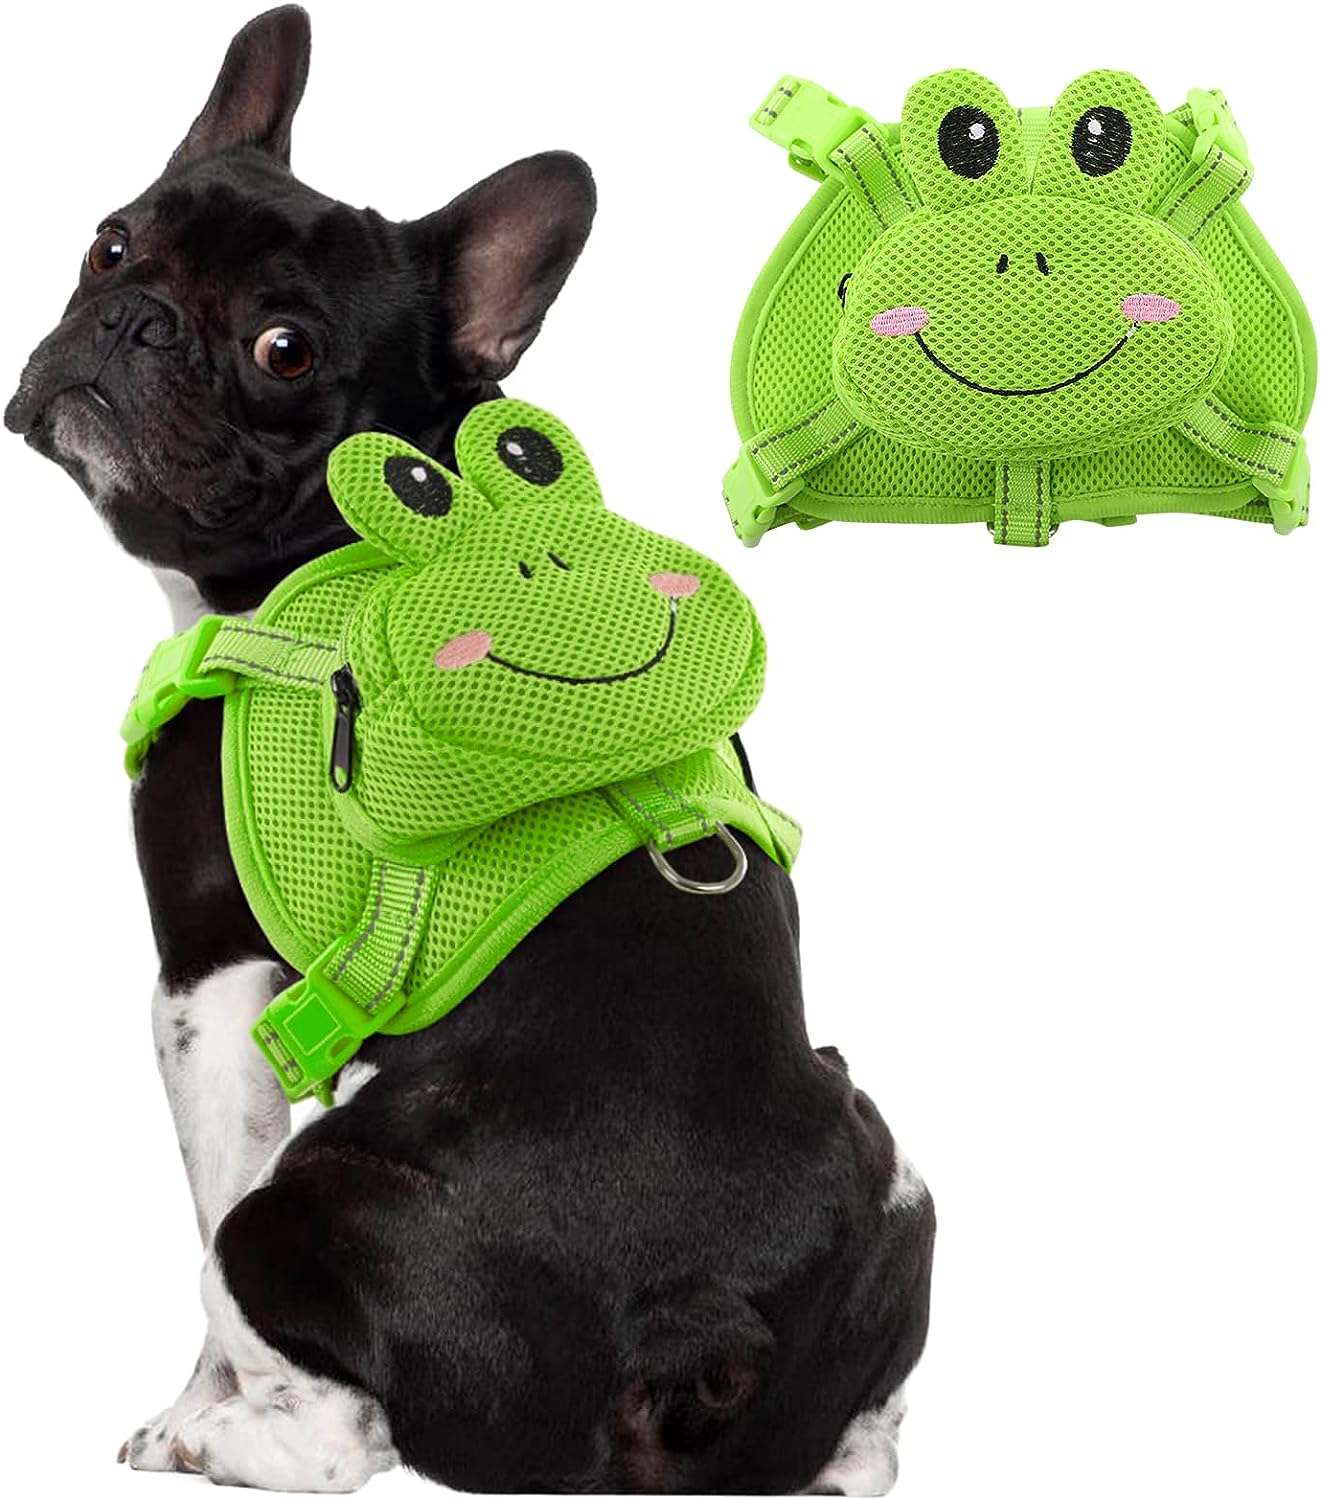 OUOBOB Dog Harness Backpack Cute Doggie Backpack – Green Frog